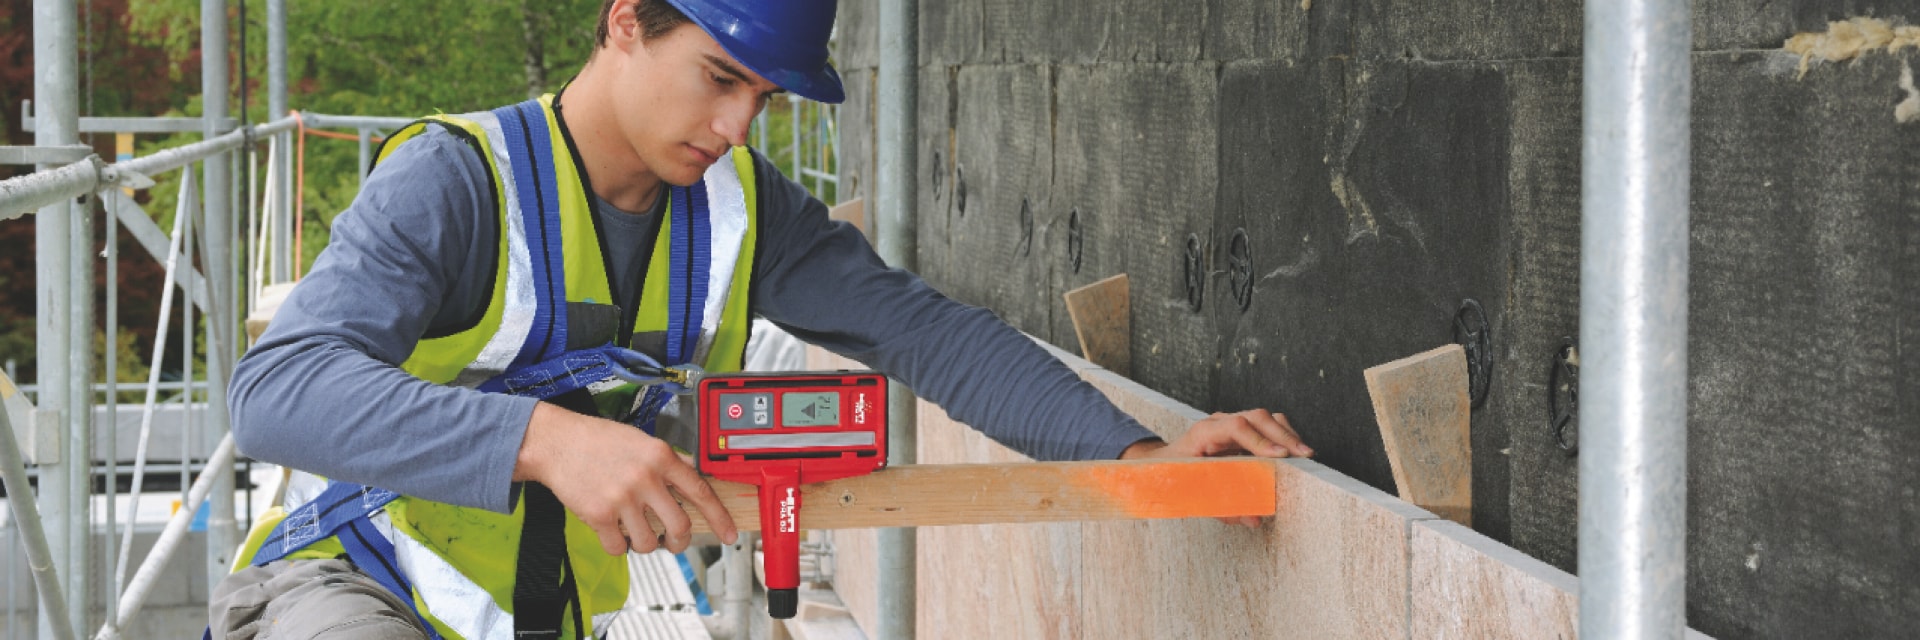 Construction worker using a Hilti tool